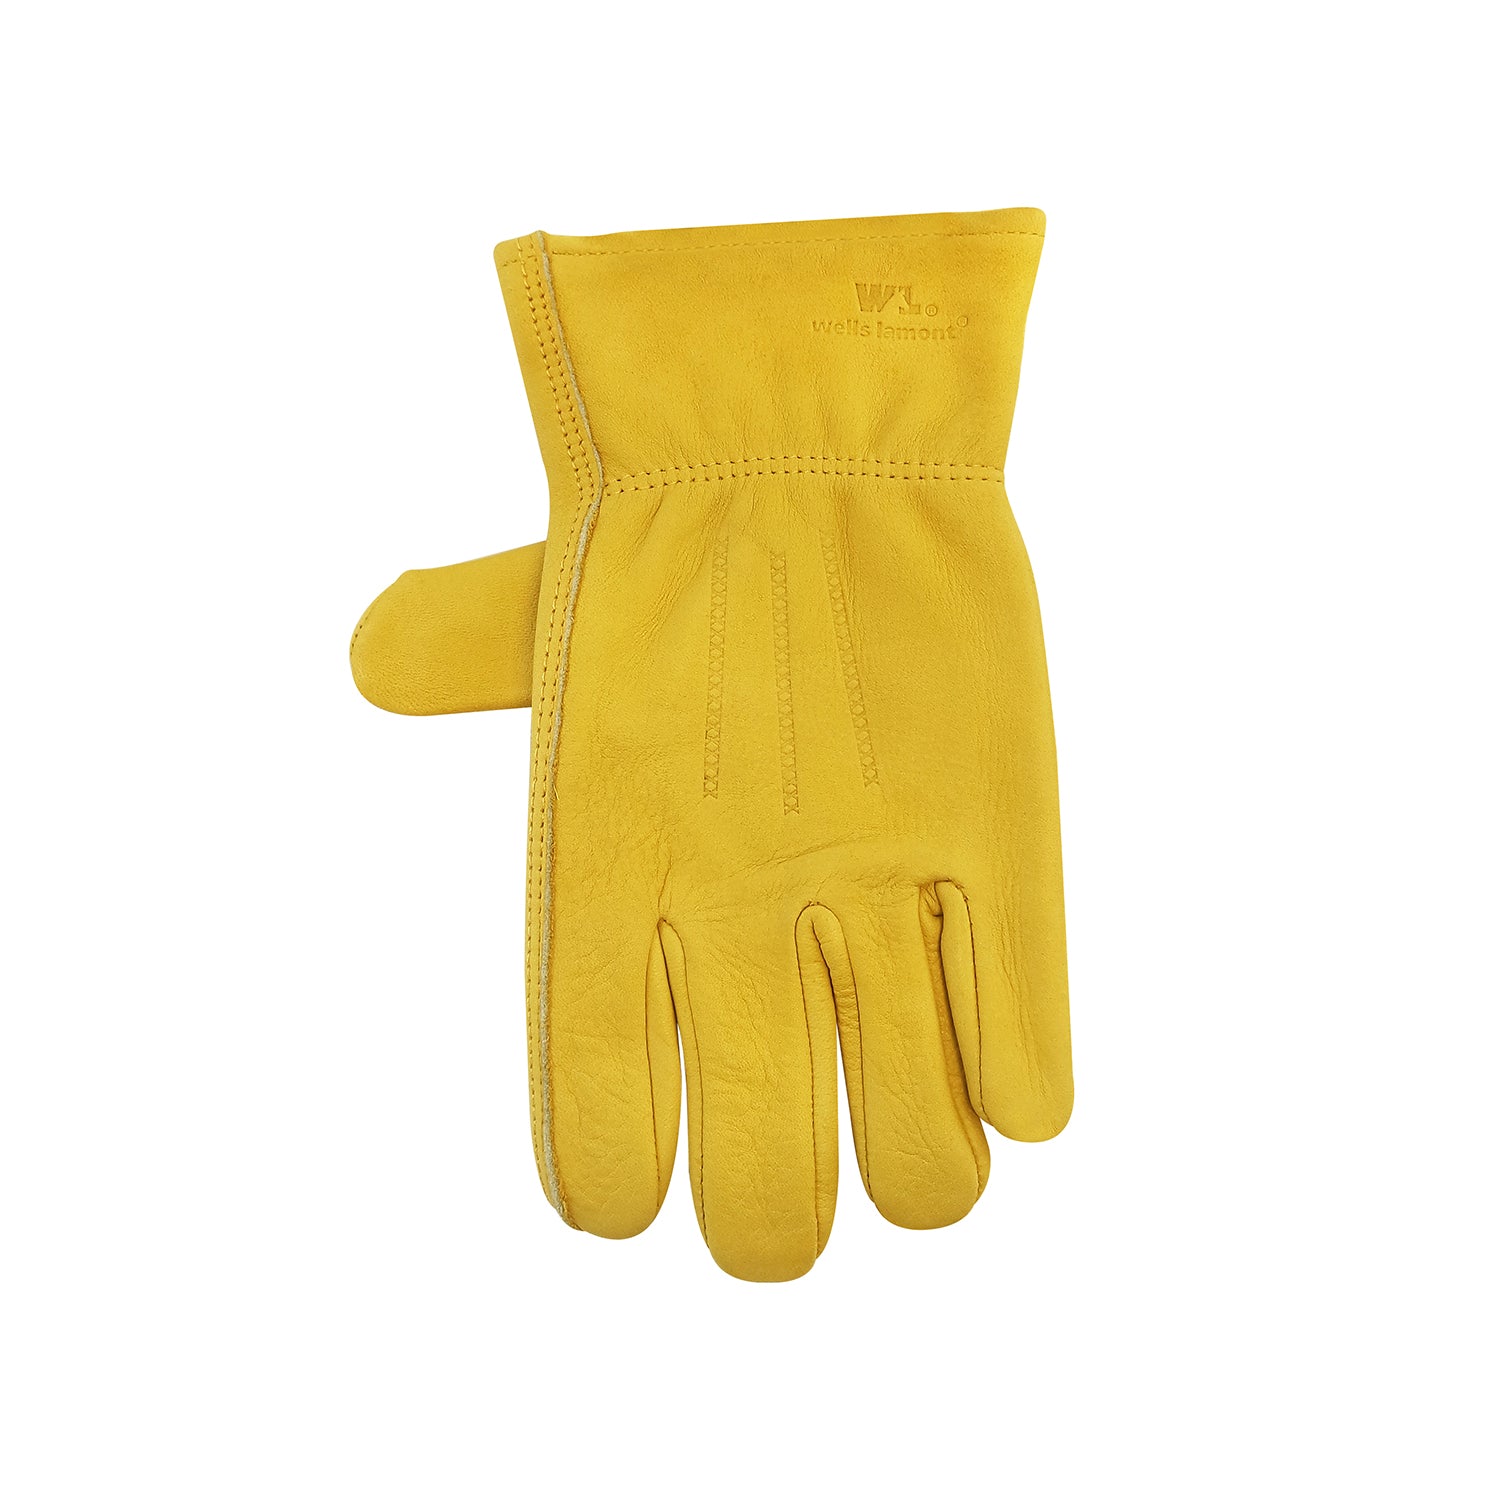 Wells Lamont Leather Work Gloves -Safety- eGPS Solutions Inc.